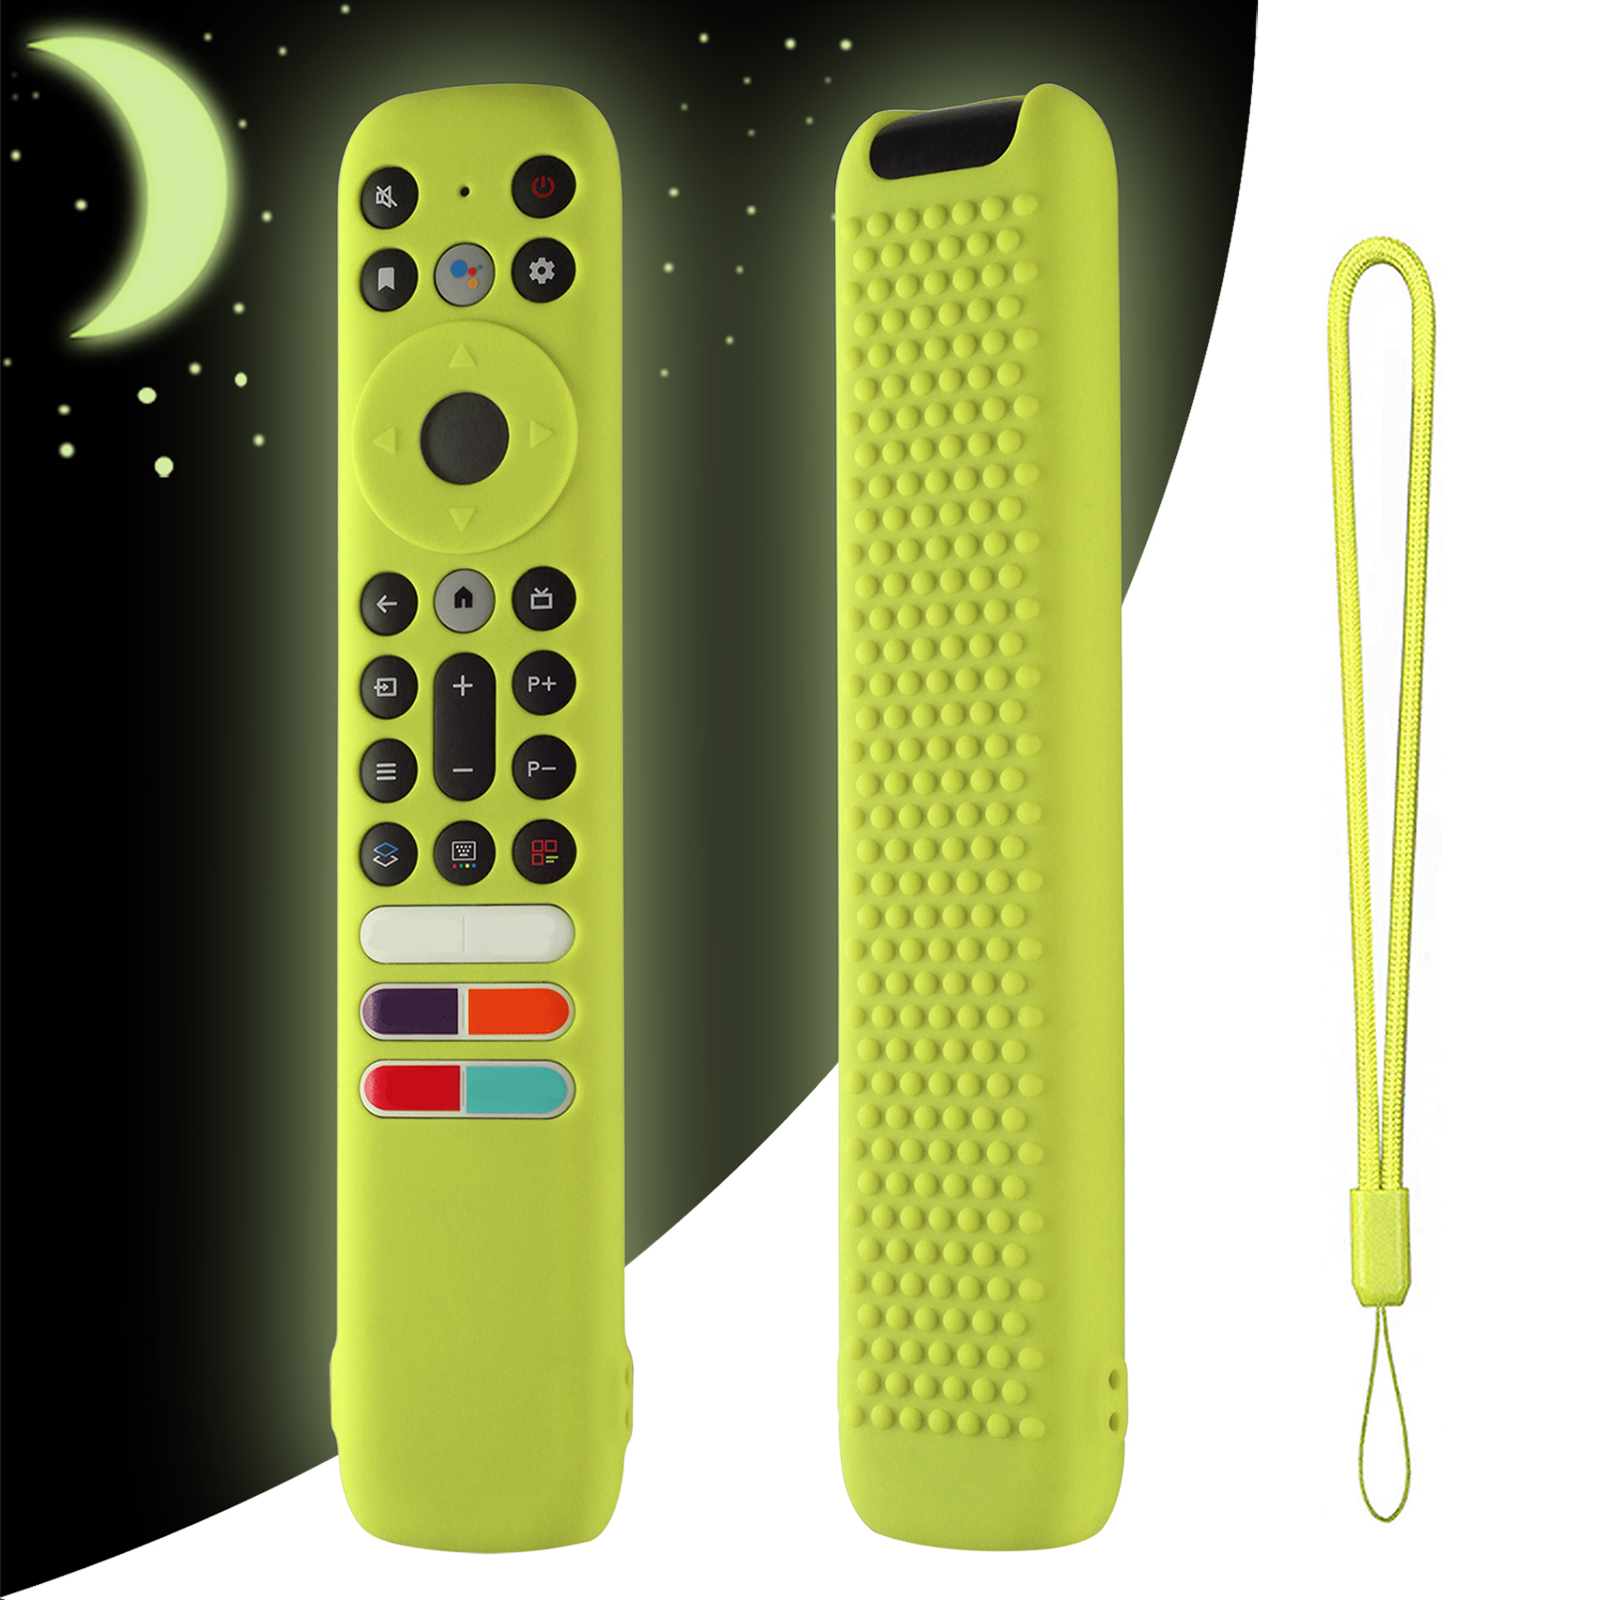 Silicone Case Compatible For TCL RC902V FMR4 FAR2 FMR1 Tv Voice Remote Control Cover Protector With Lanyard Luminous green